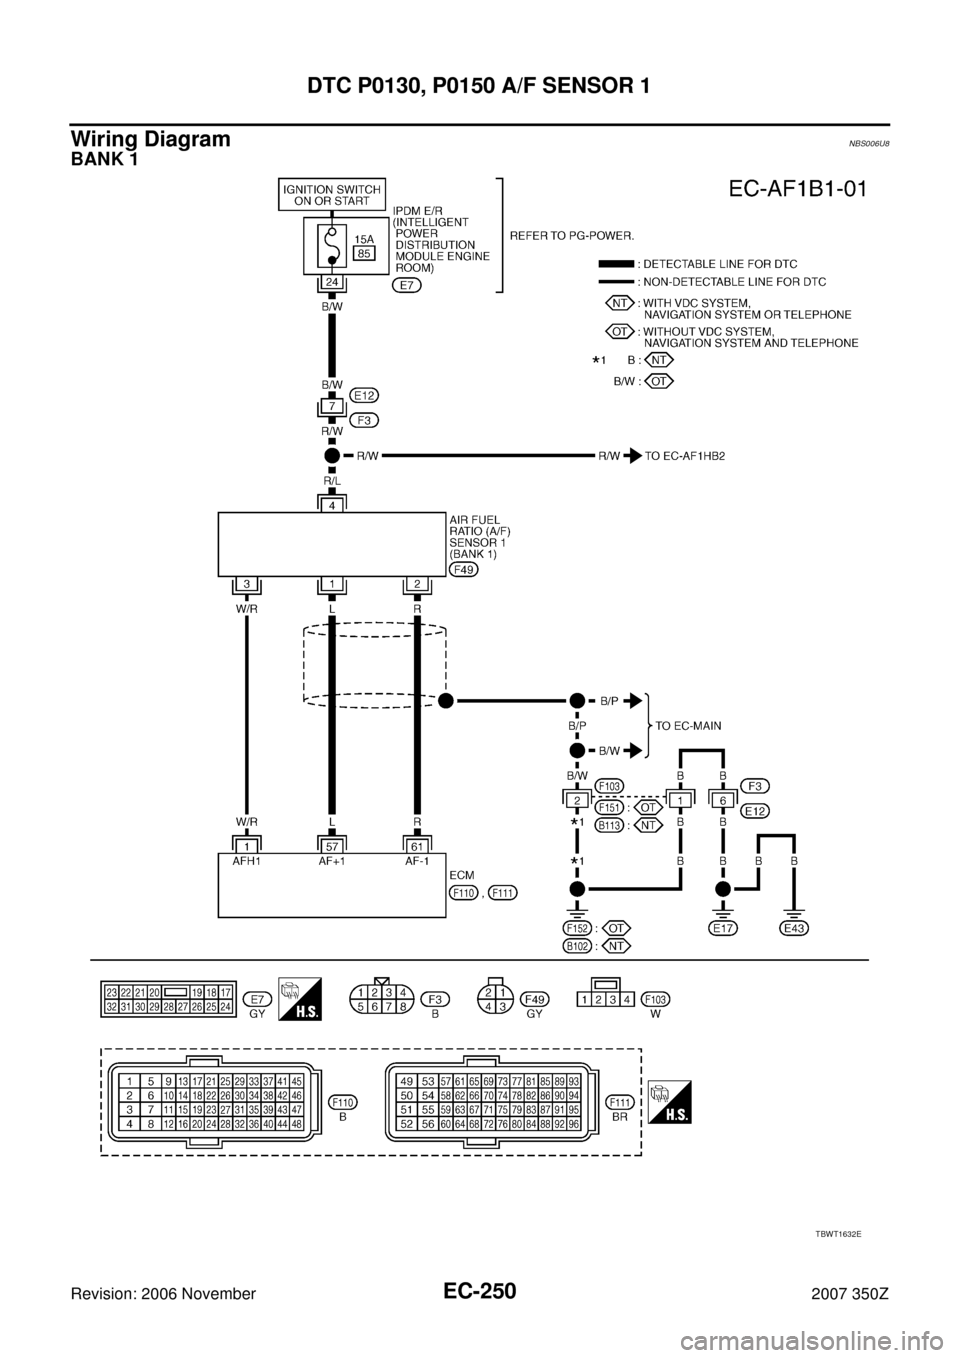 NISSAN 350Z 2007 Z33 Engine Control Owners Guide EC-250
DTC P0130, P0150 A/F SENSOR 1
Revision: 2006 November2007 350Z
Wiring DiagramNBS006U8
BANK 1
TBWT1632E 